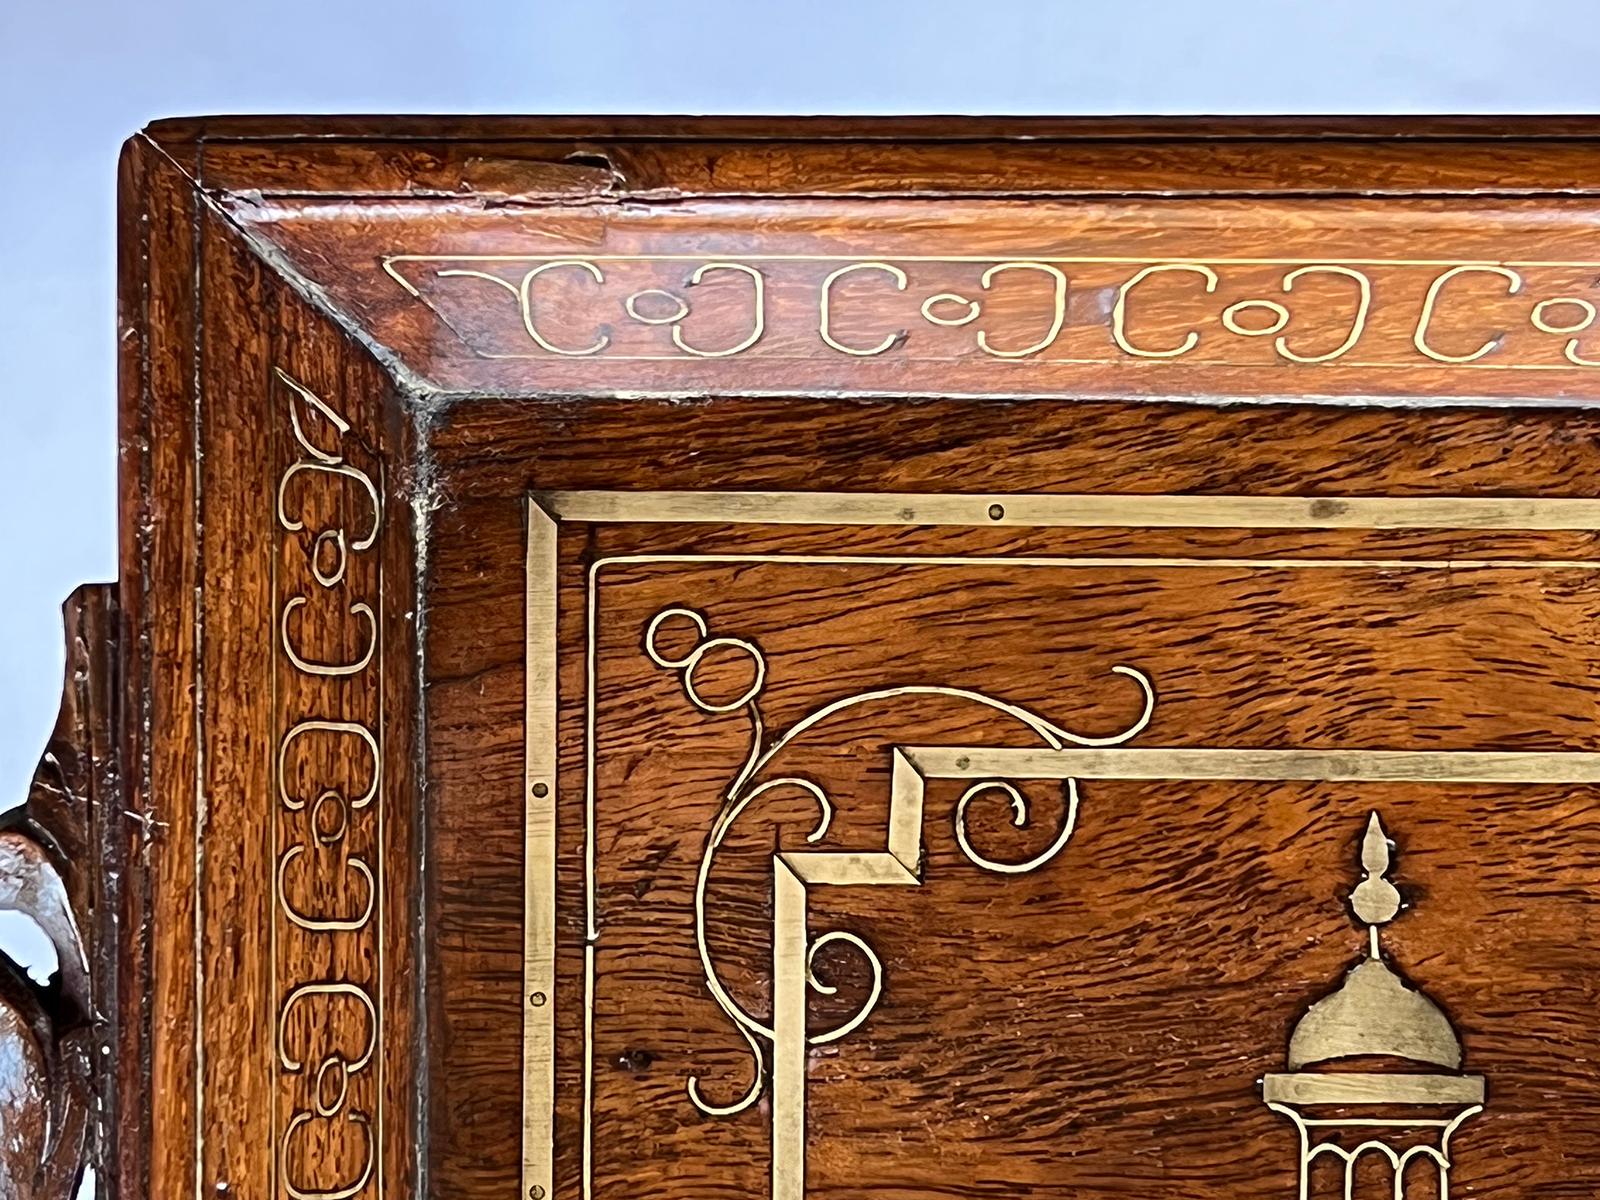 With turned fold-down legs, the rectangular tray centering a brass inlaid Taj Mahal (commissioned in 1631 by the Mughal emperor Hhah Jahan to house the tomb of his wife, Mumtaz Mahal); the canted sides of the tray dovetail joined and decorated with